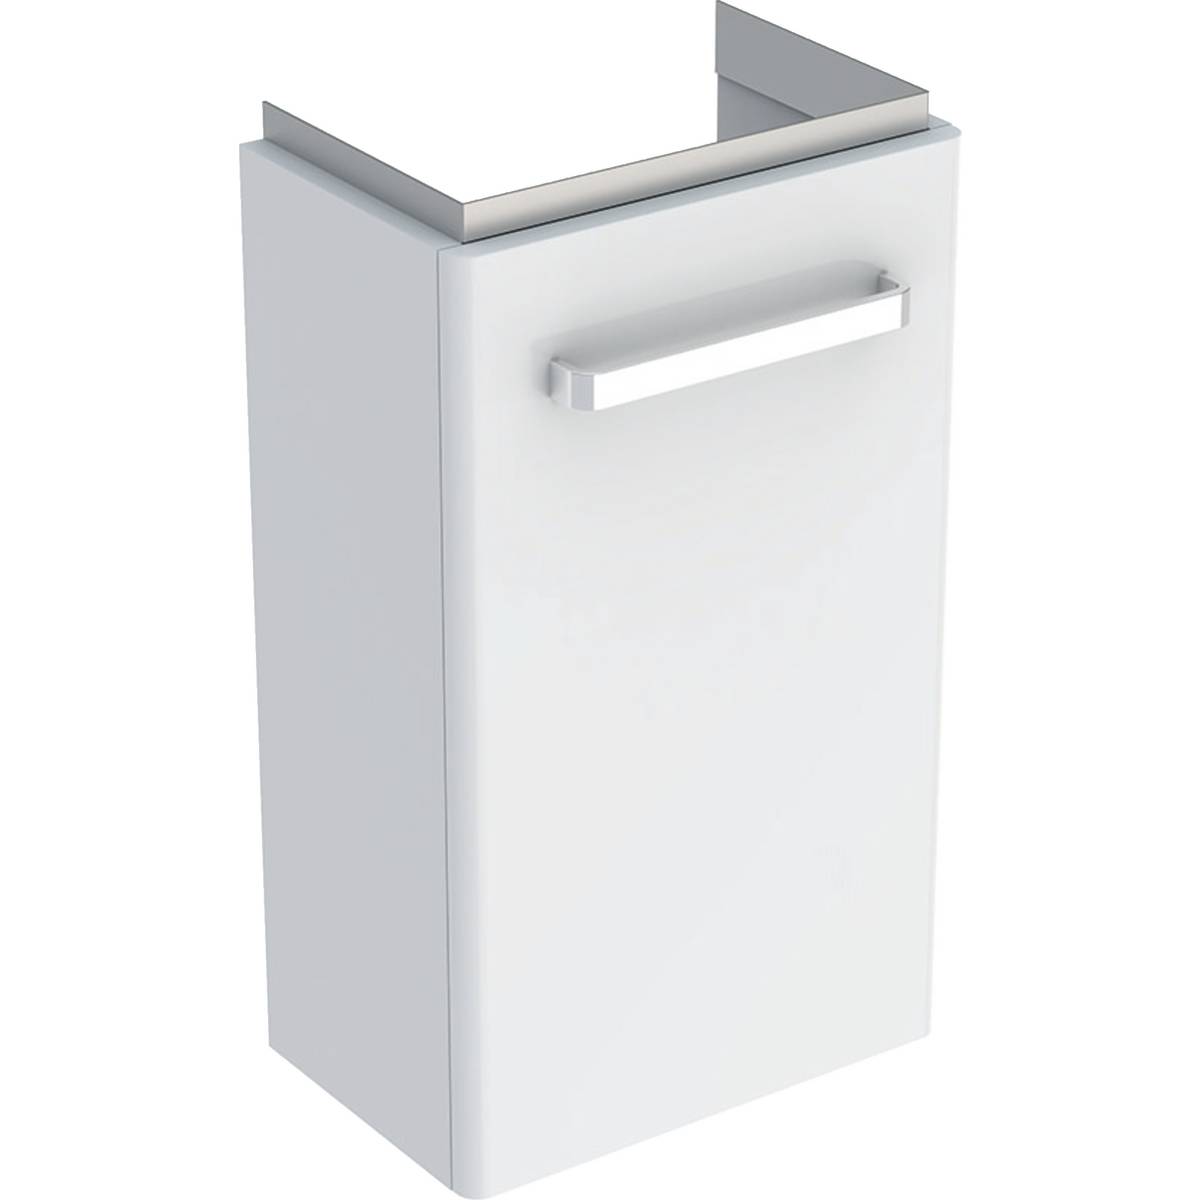 Selnova Compact Cabinet for Handrinse Basin, with One Door, Small Projection